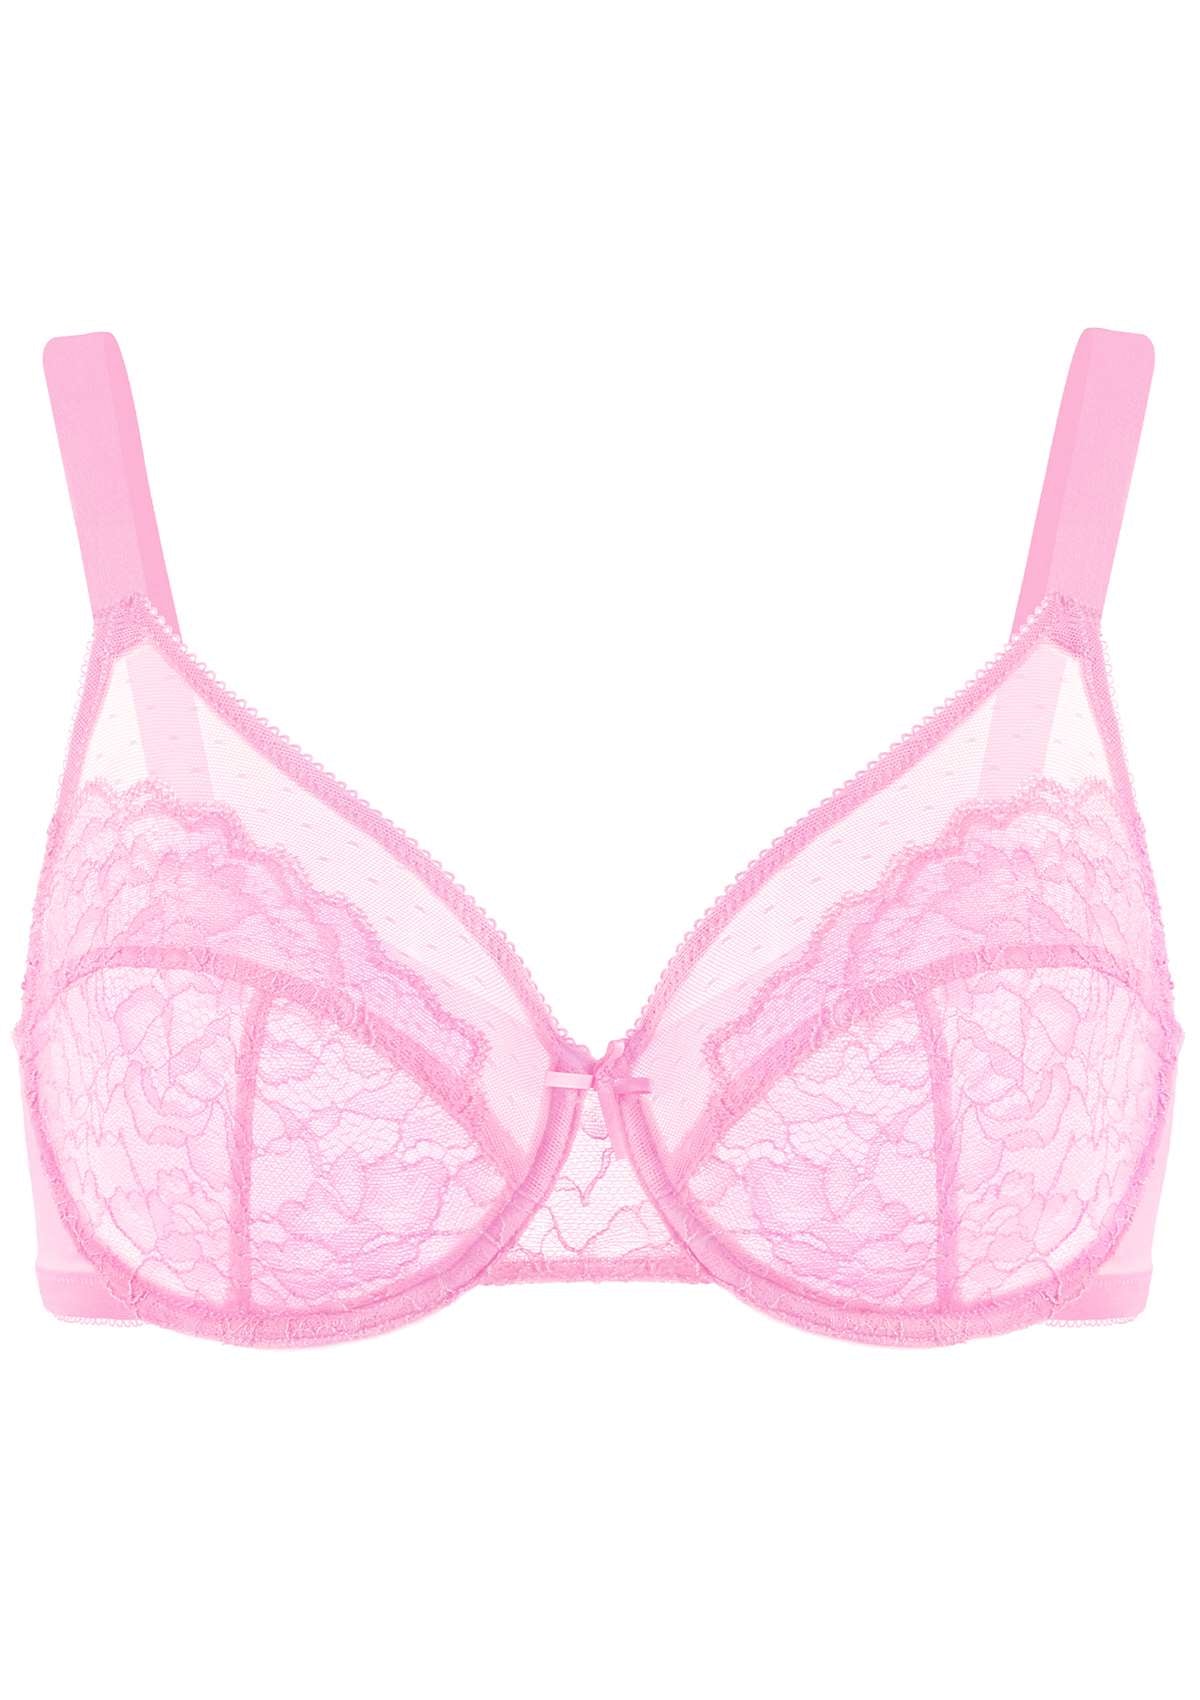 HSIA Enchante Lacy Bra: Comfy Sheer Lace Bra With Lift - Pink / 44 / DD/E